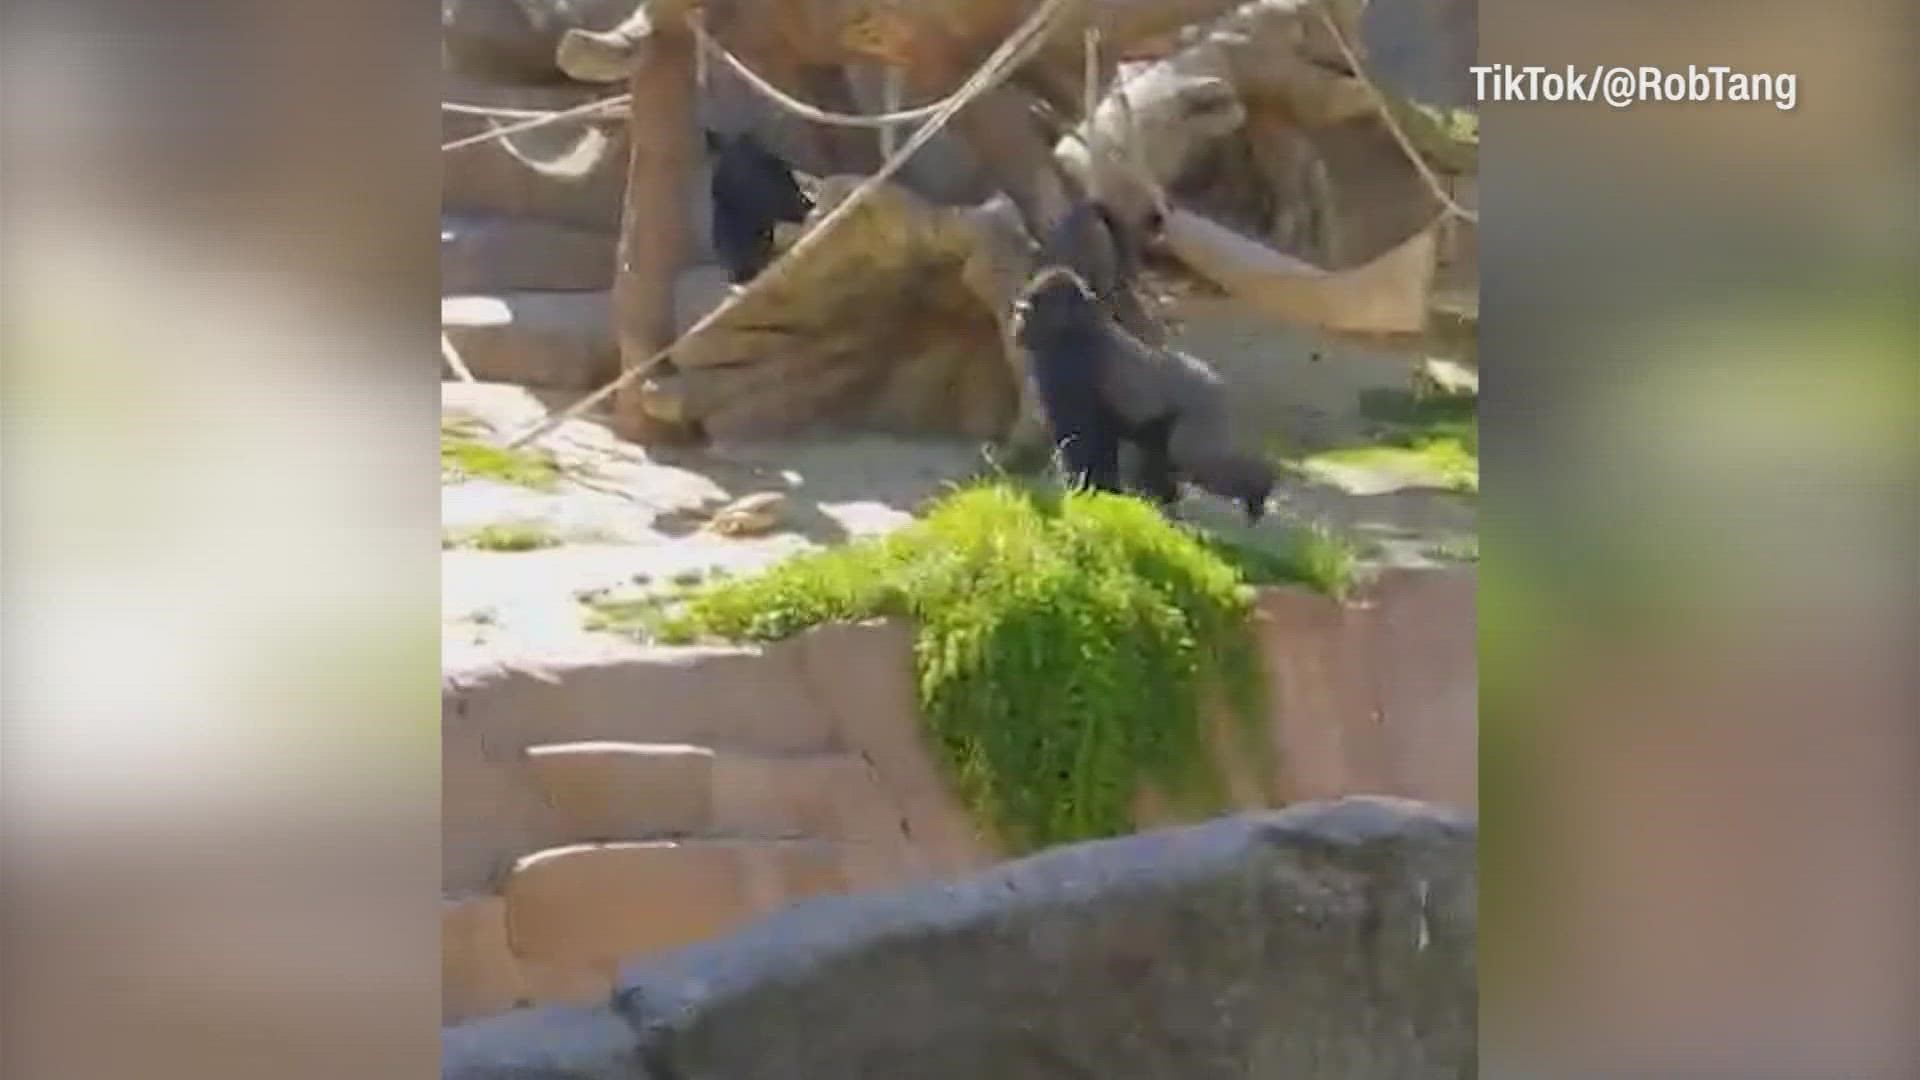 Two dogs were loose at the San Diego Zoo and one of them got into the gorilla habitat.